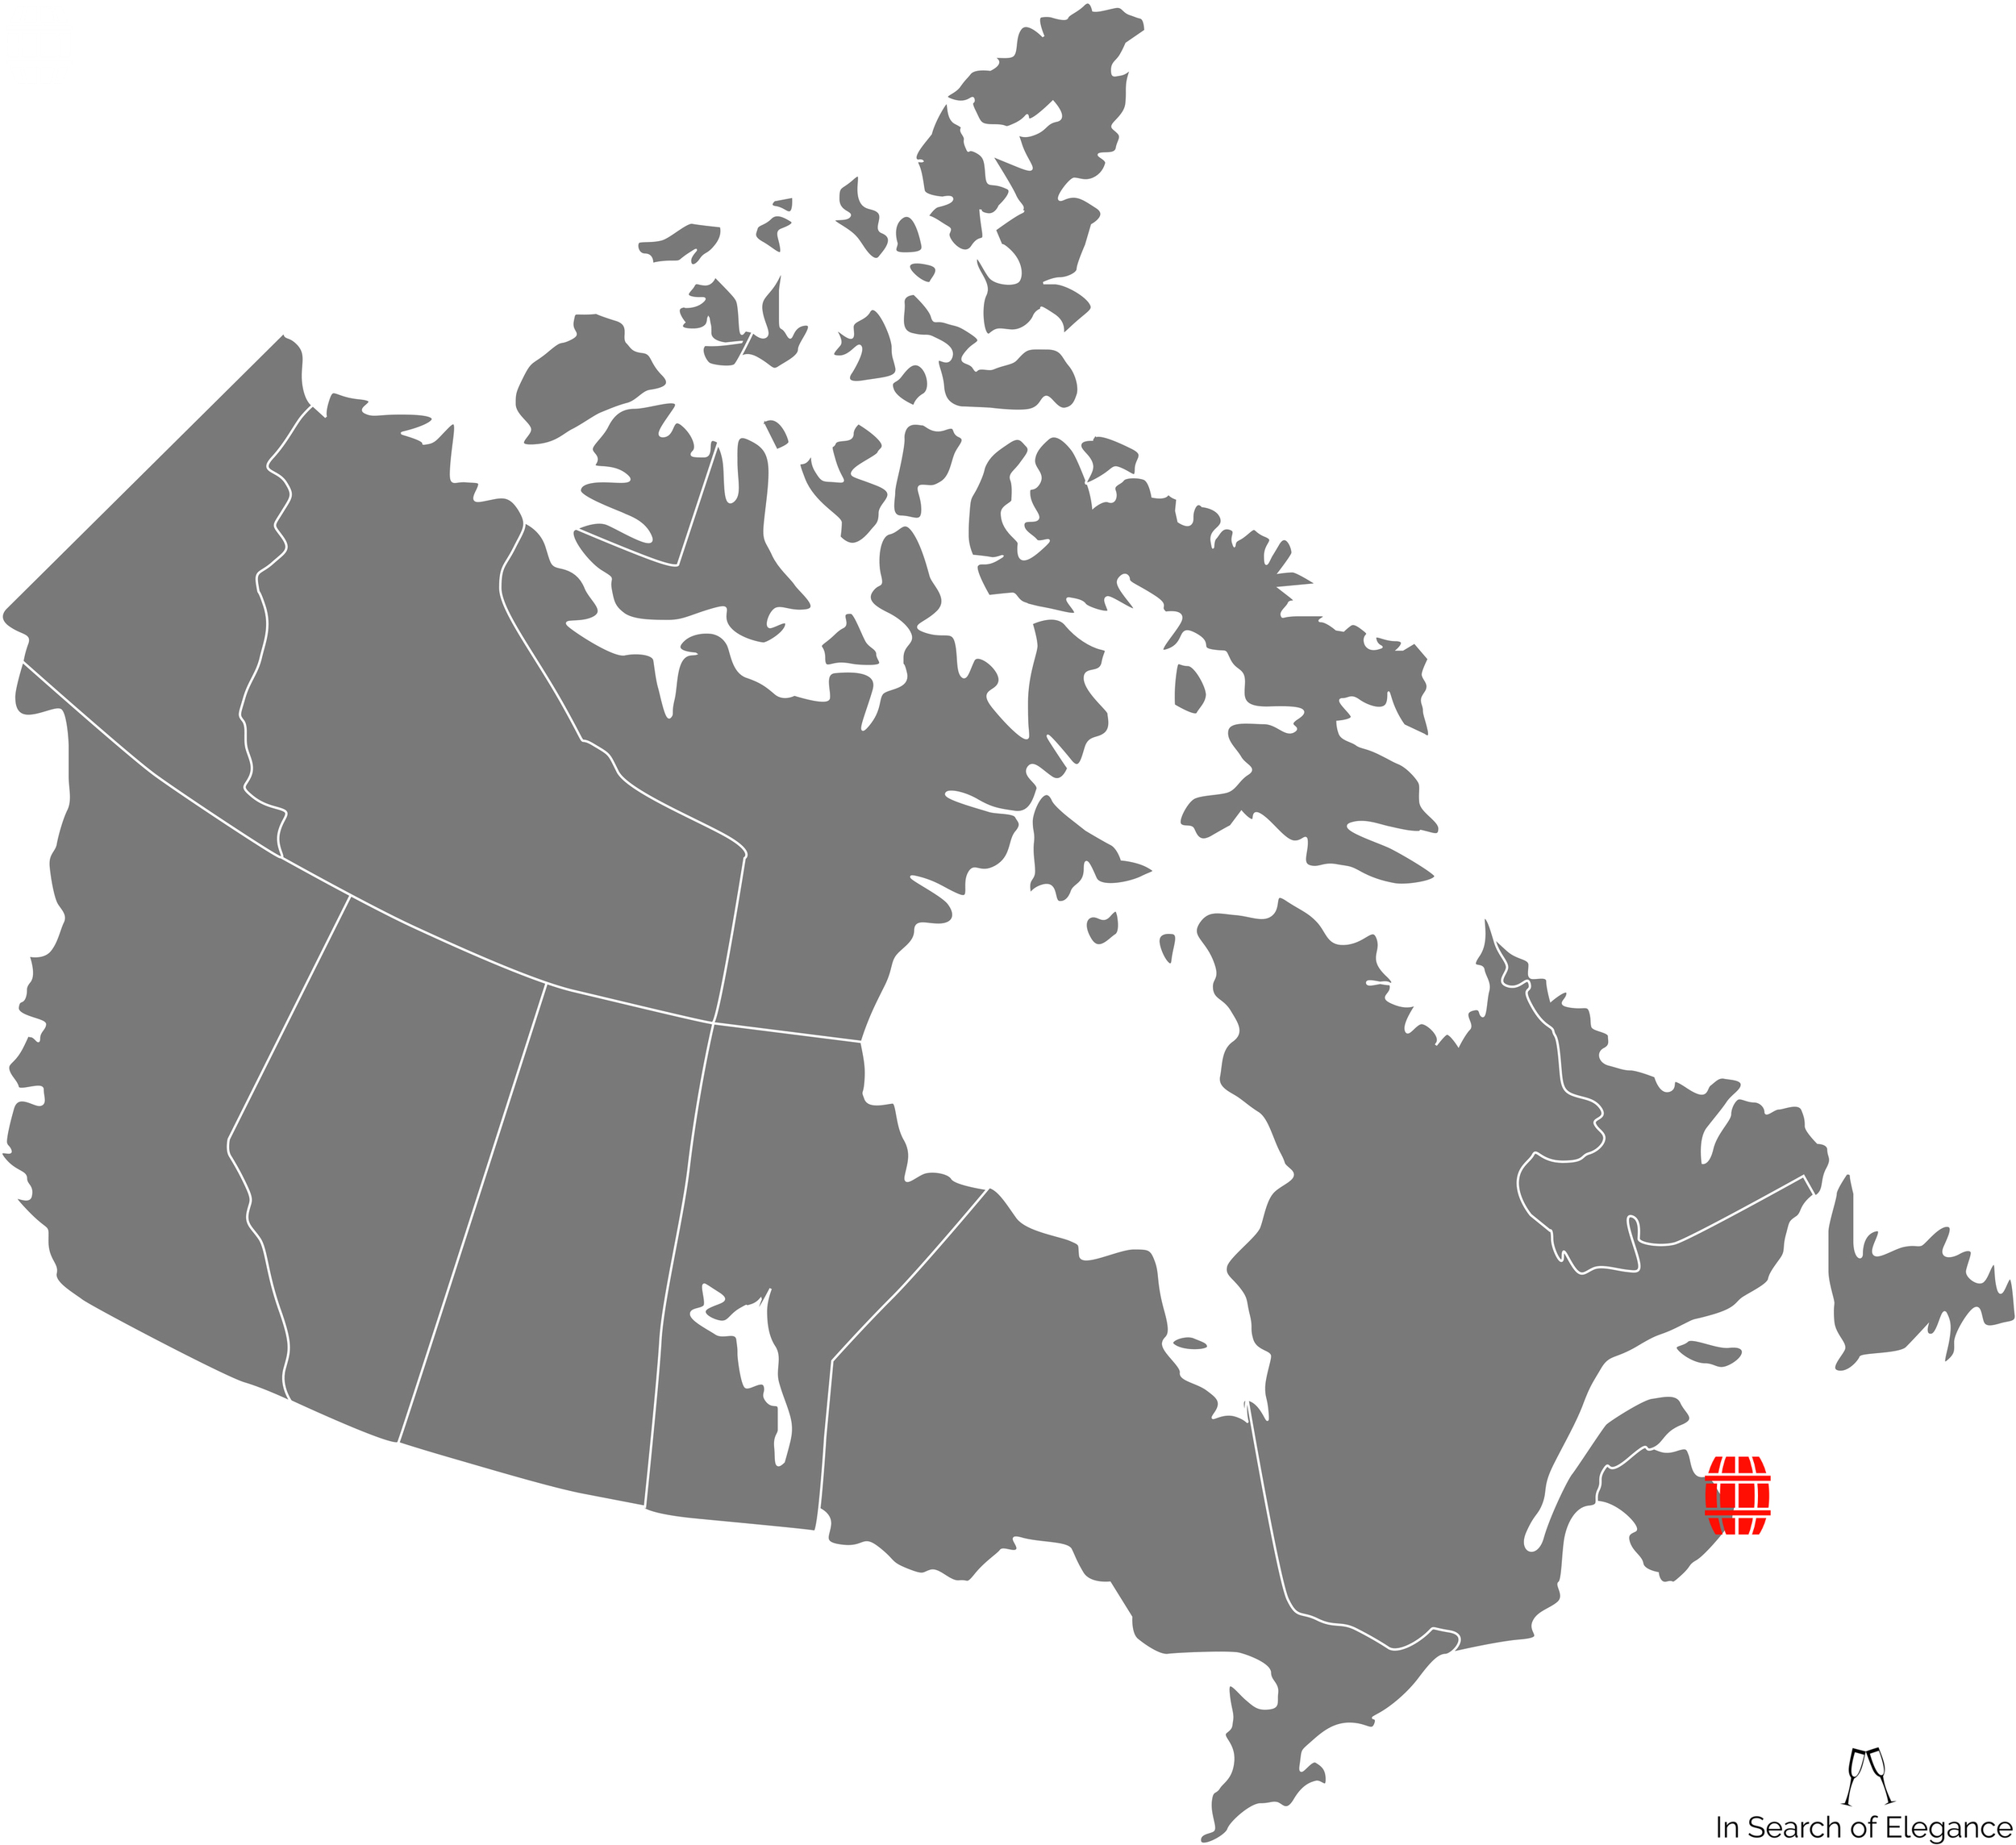 The map doesn't quite show Nova Scotia (or PEI, for that matter) properly. A search for Cape Breton might give you a better sense of the island than the crude positioning above....